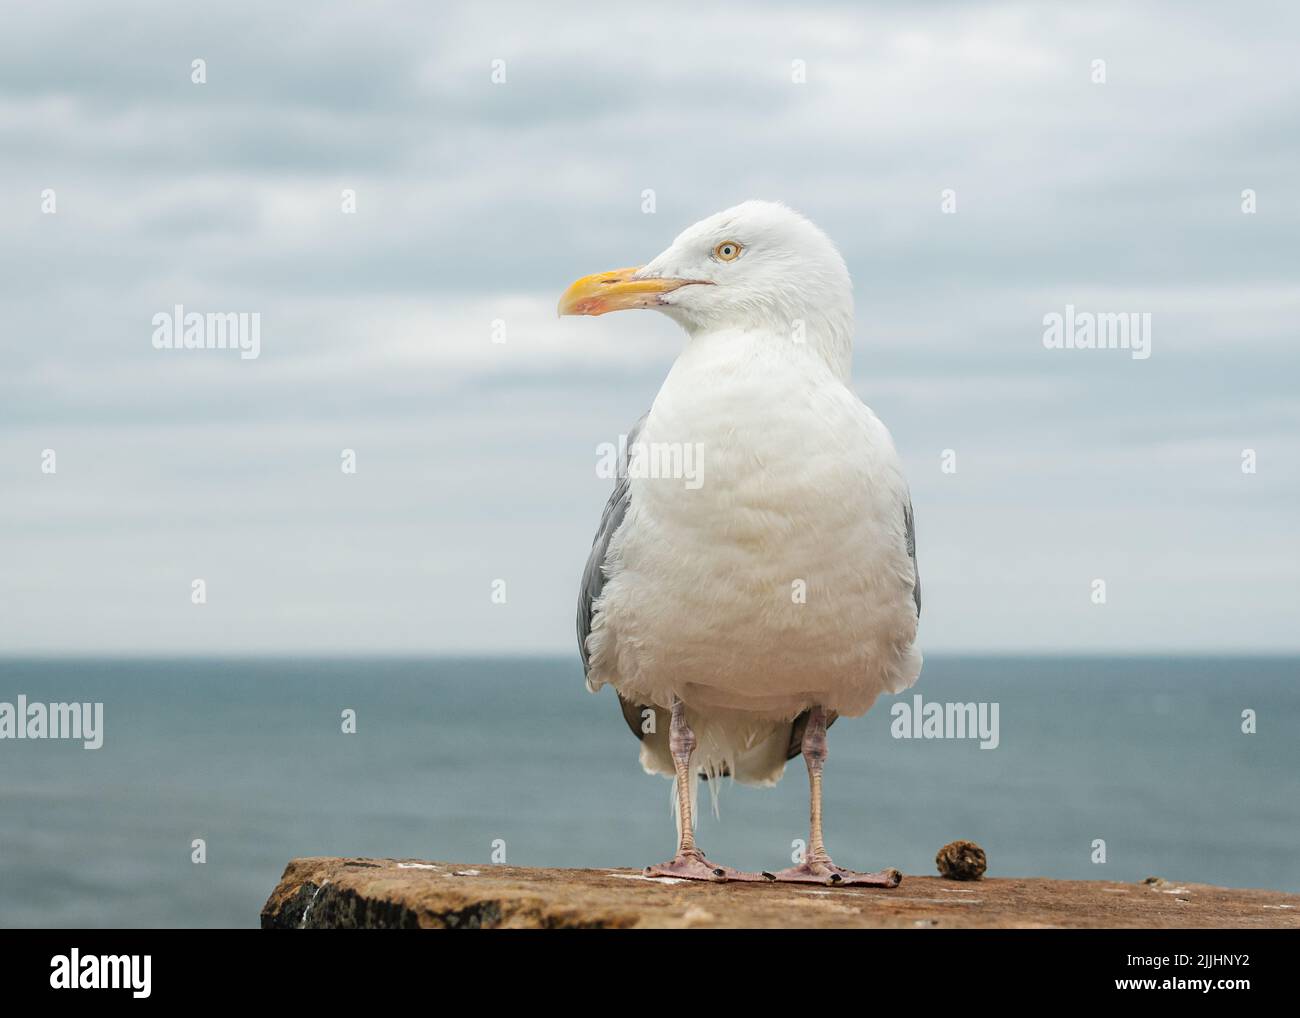 Sea gull standing on a wall overlooking the North Sea at Tynemouth with head turned to the side Stock Photo